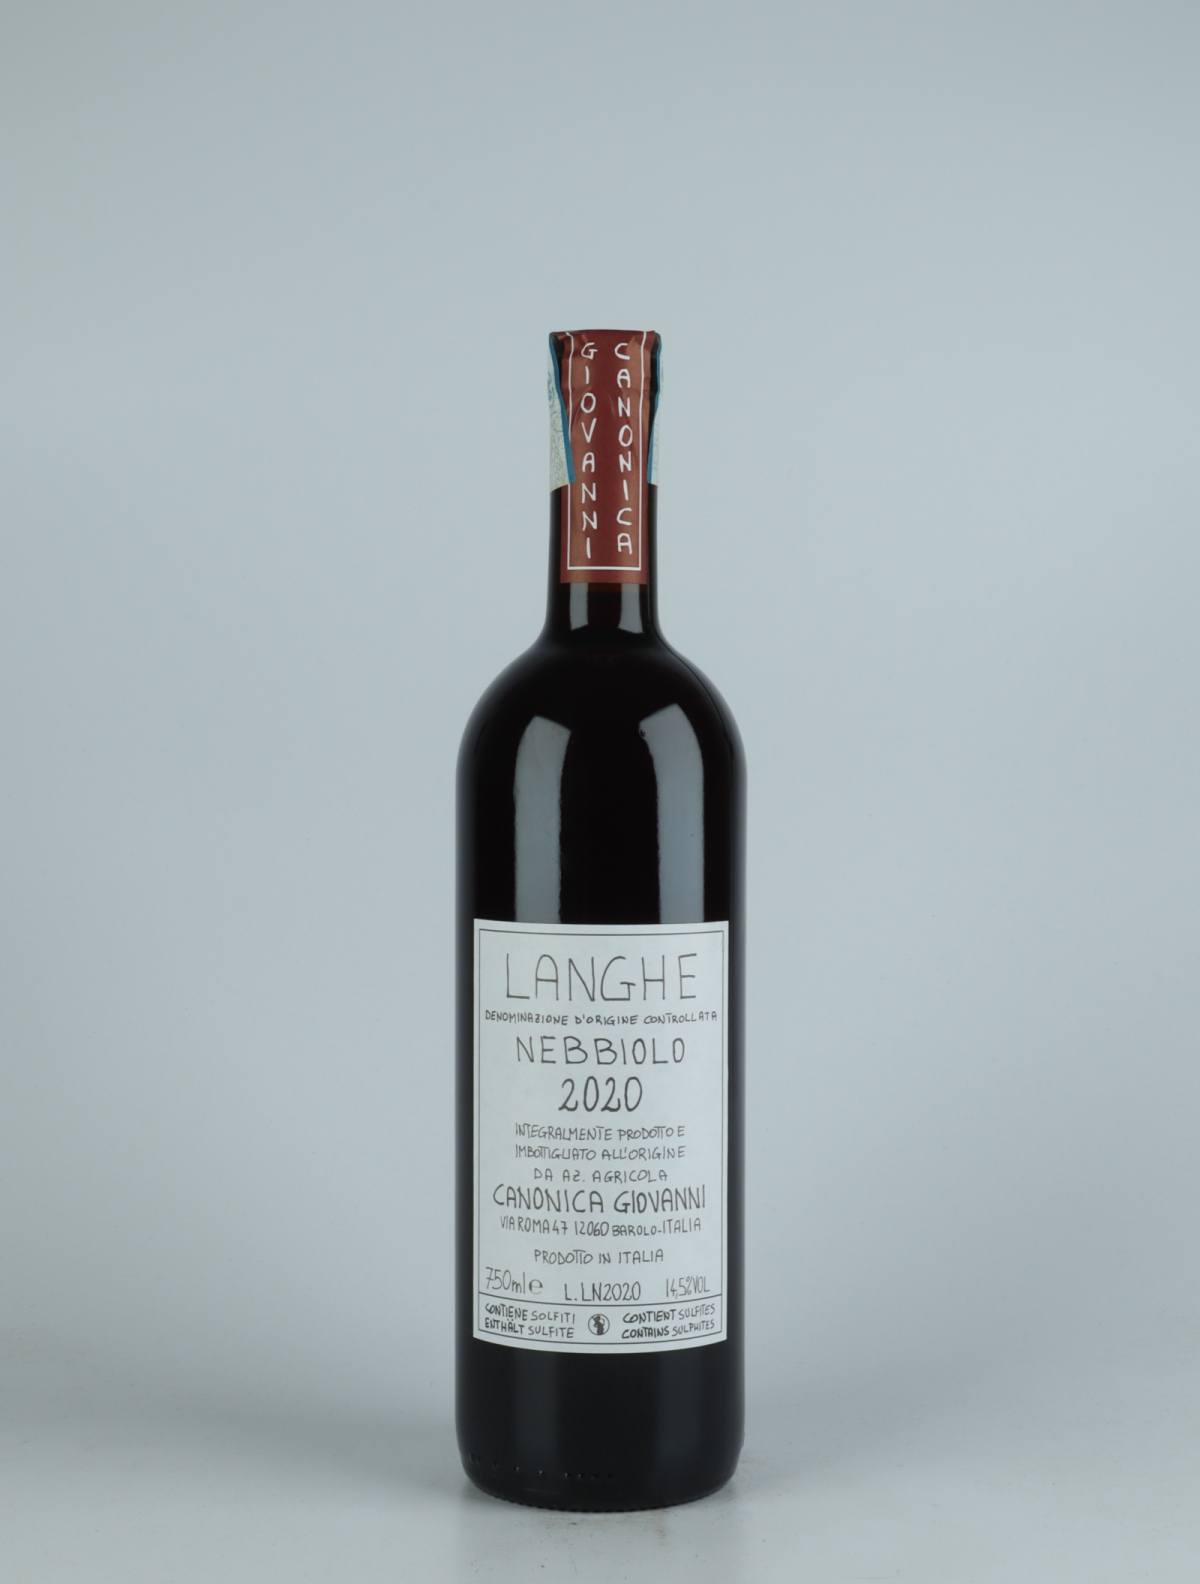 A bottle 2020 Langhe Nebbiolo Red wine from Giovanni Canonica, Piedmont in Italy